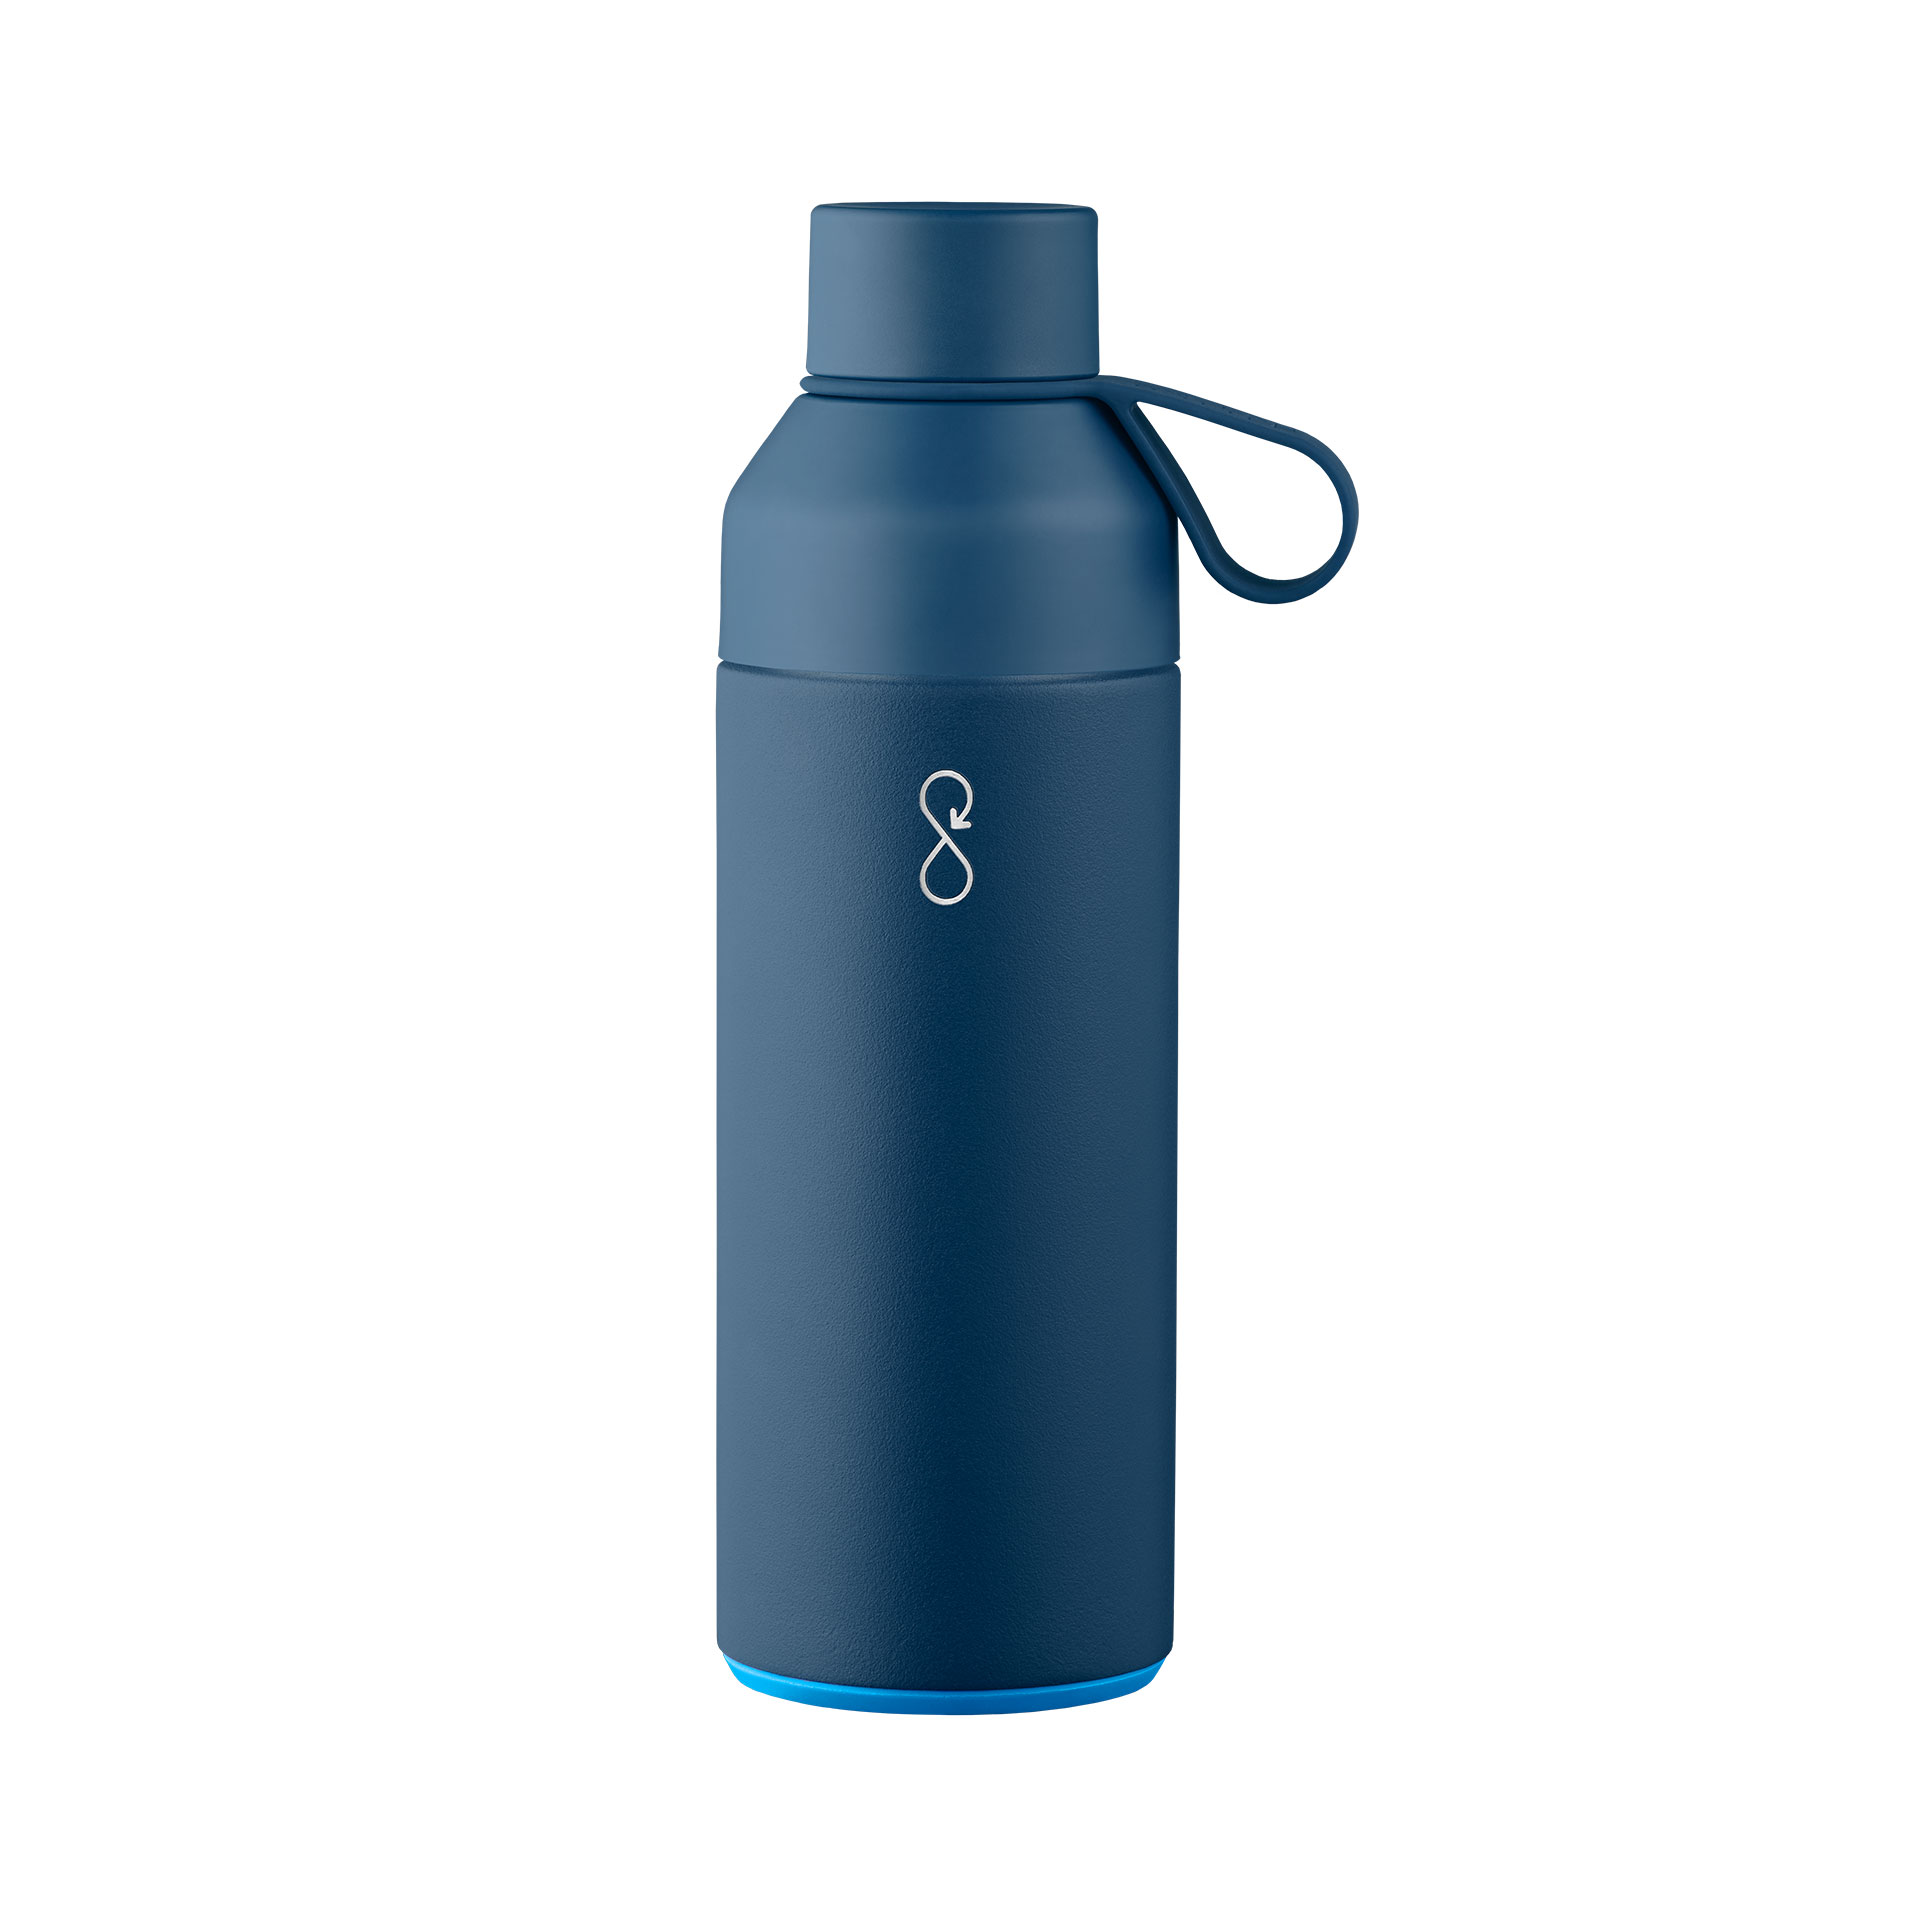 The Ocean Bottle is made from part recycled plastic and stainless steel. Each bottle funds the collection of 11.4kg of plastic, equivalent to 1000 plastic bottles. Plastic Bank ensures that the plastic waste is collected by locals living in coastal communities, mostly in Asia. This bottle is vacuum thermos insulated, this means it keeps cold drinks cold and hot drinks hot. It comes with an easy carry silicone loop, double opening for easy drink and a clean drinking cup. Dishwasher safe. 500ml capacity. Royal Blue